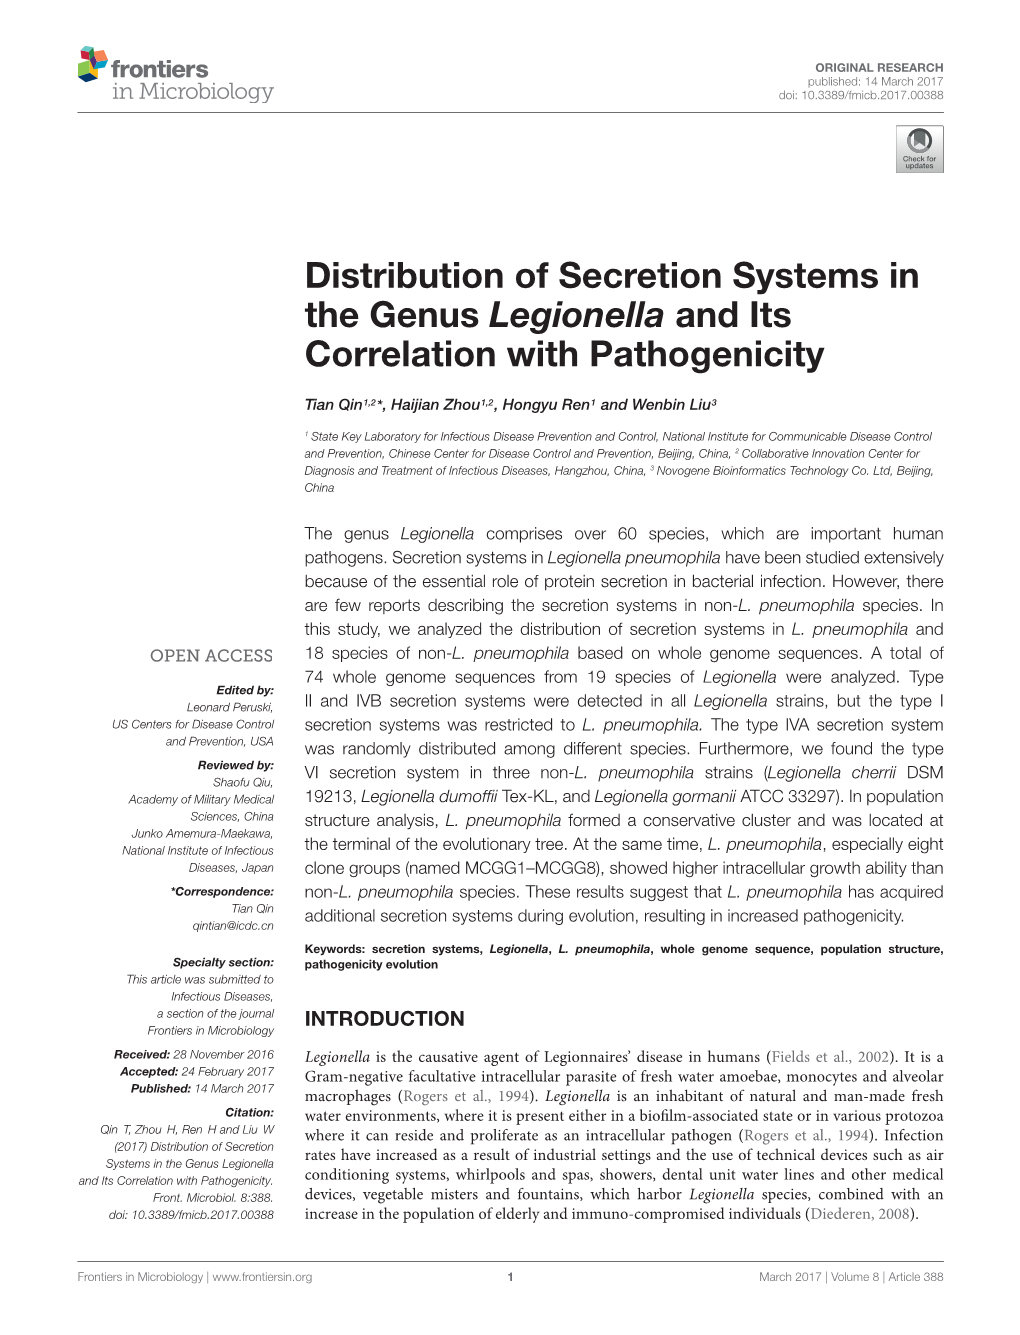 Distribution of Secretion Systems in the Genus Legionella and Its Correlation with Pathogenicity